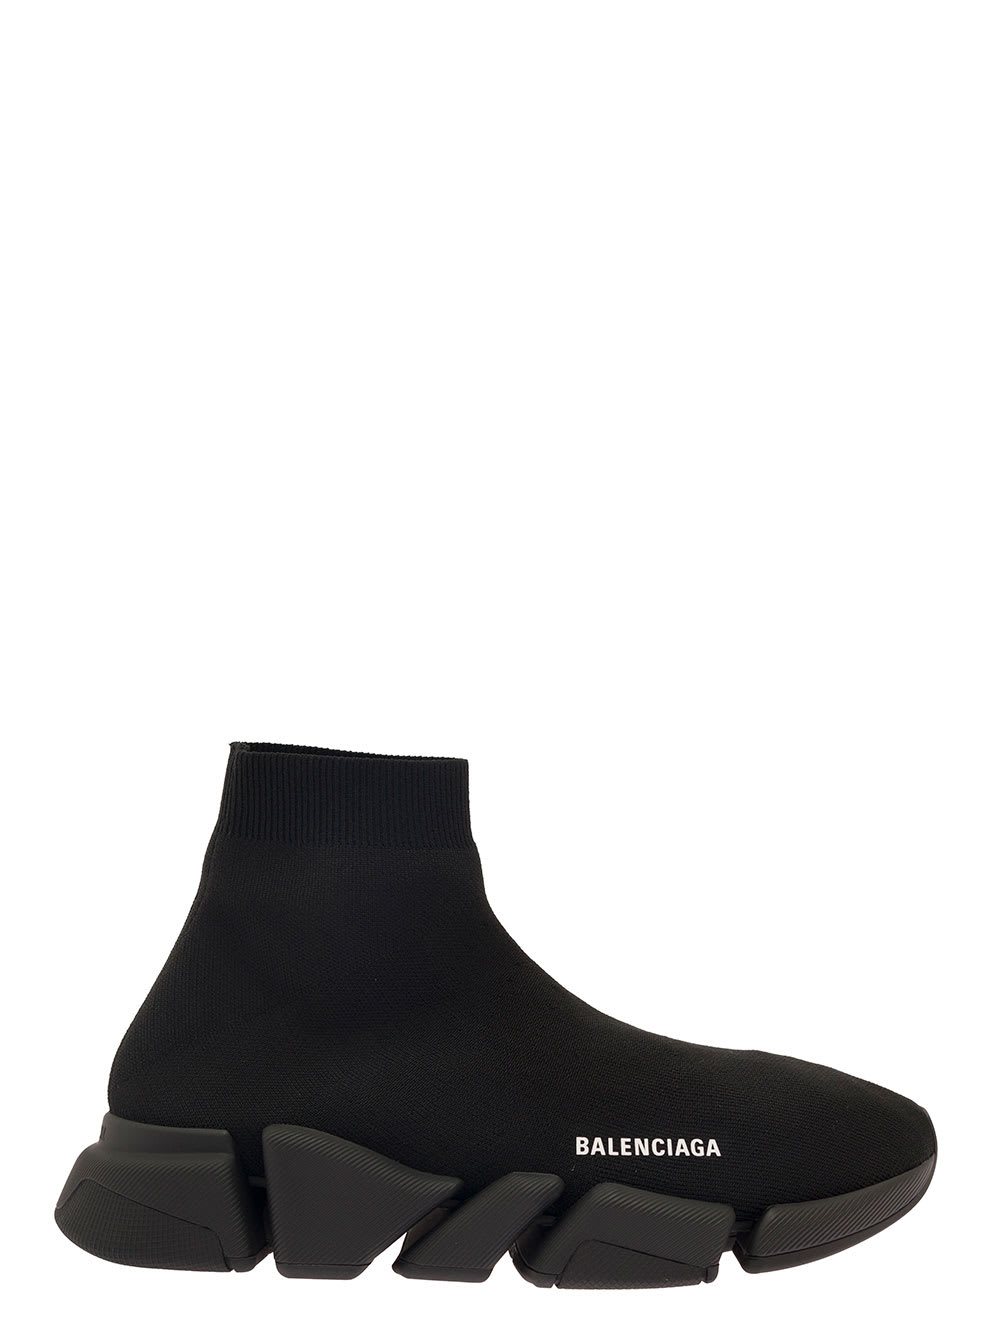 BALENCIAGA SPEED 2.0 BLACK SNEAKERS WITH LOGO DETAIL IN STRETCH FABRIC MAN